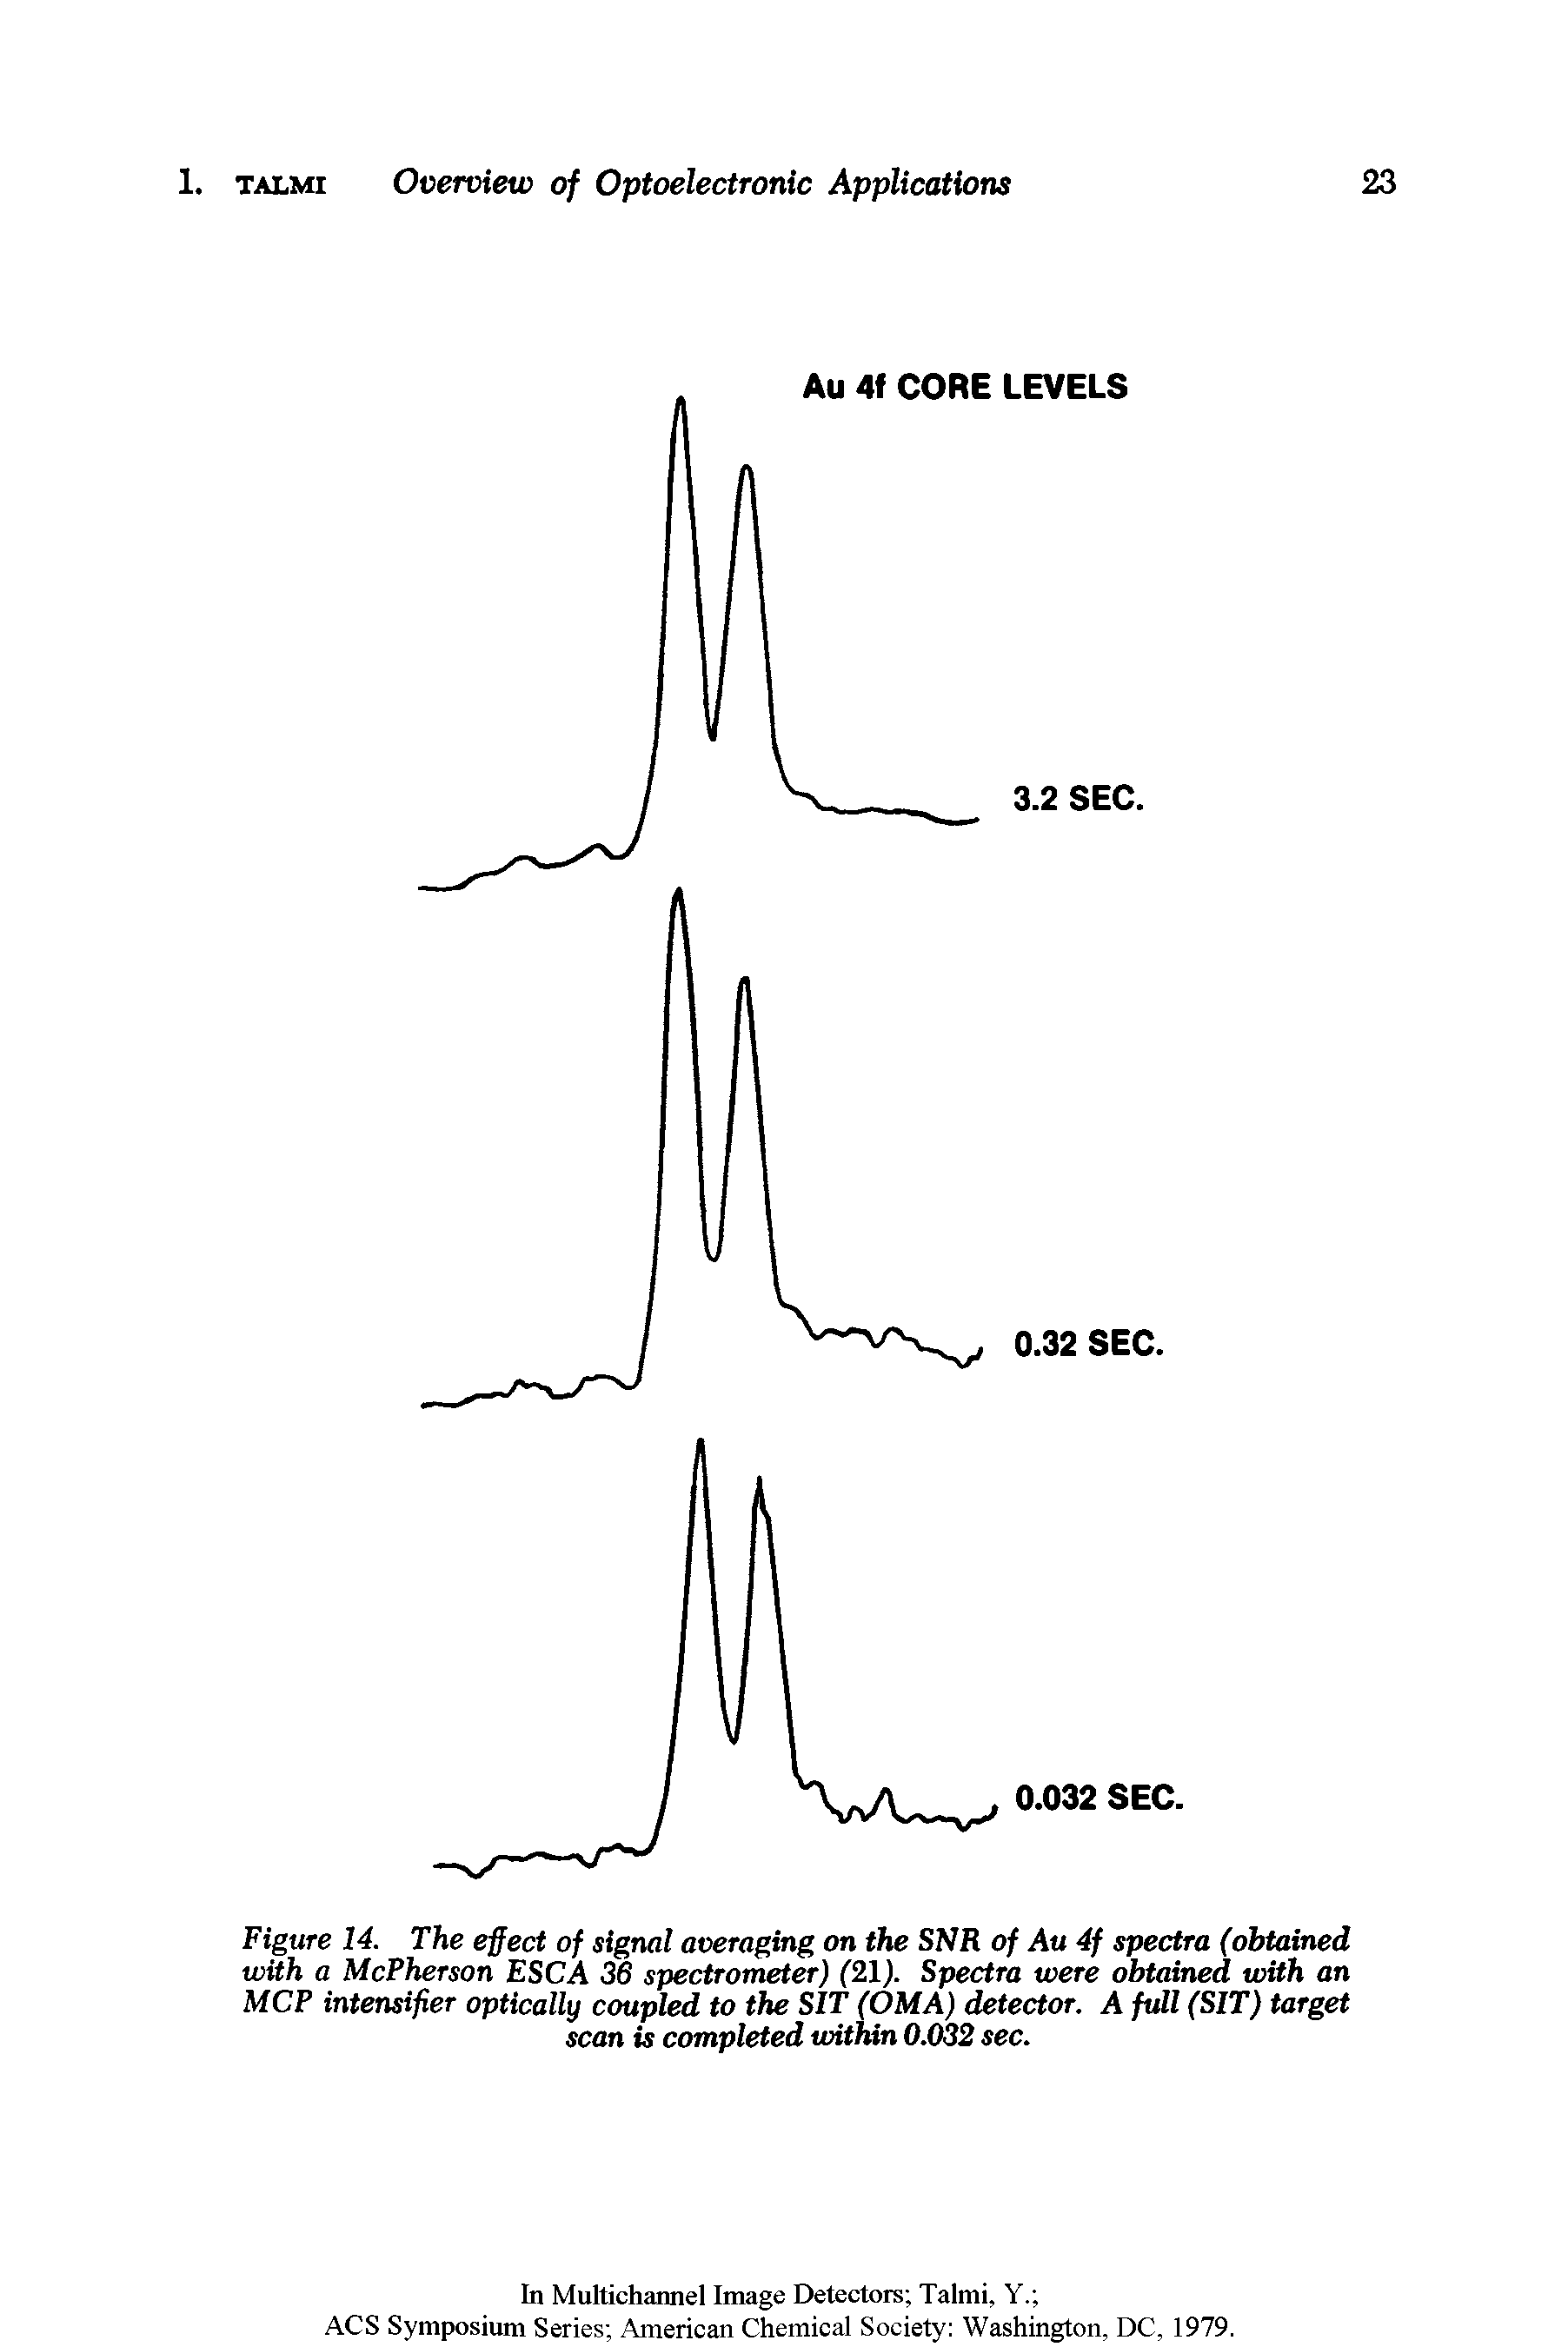 Figure 14. The effect of signal averaging on the SNR of Au 4f spectra (obtained with a McPherson ESC A 36 spectrometer) (21). Spectra were obtained with an MCP intensifier optically coupled to the SIT (OMA) detector. A full (SIT) target scan is completed within 0.032 sec.